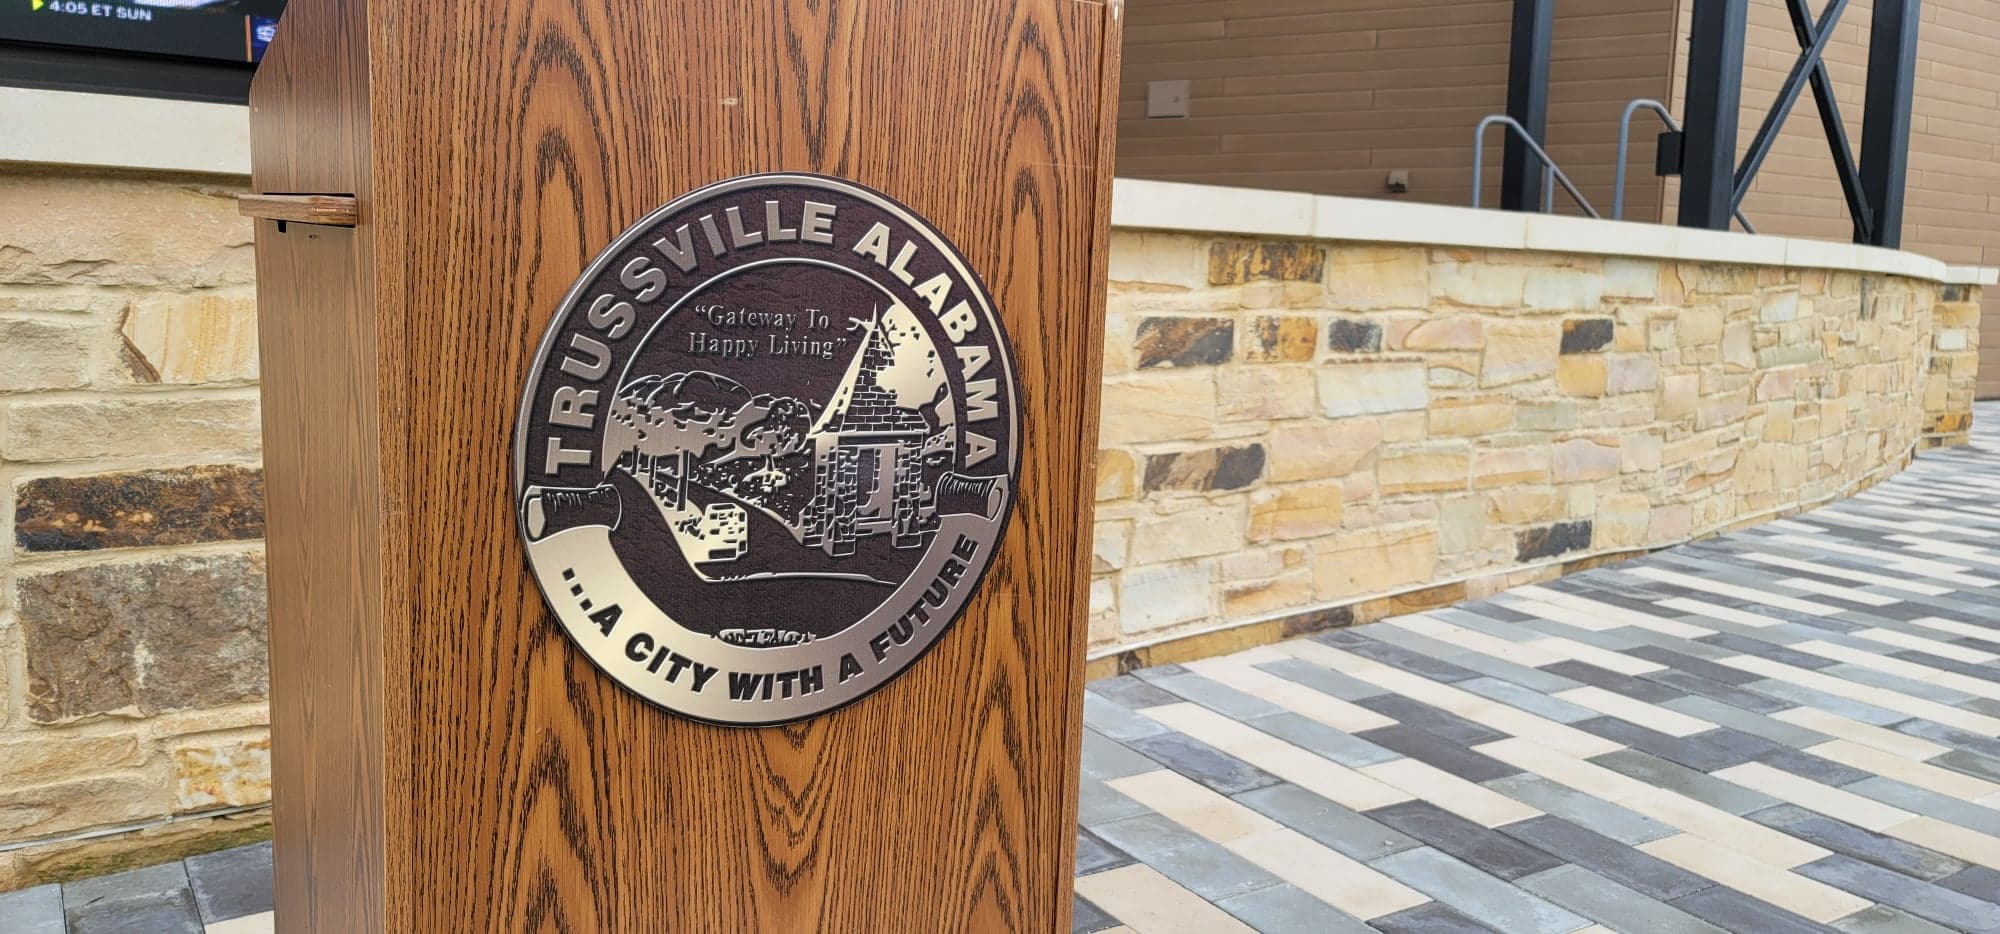 New Trussville City Council members undergo training, prepare for first meeting